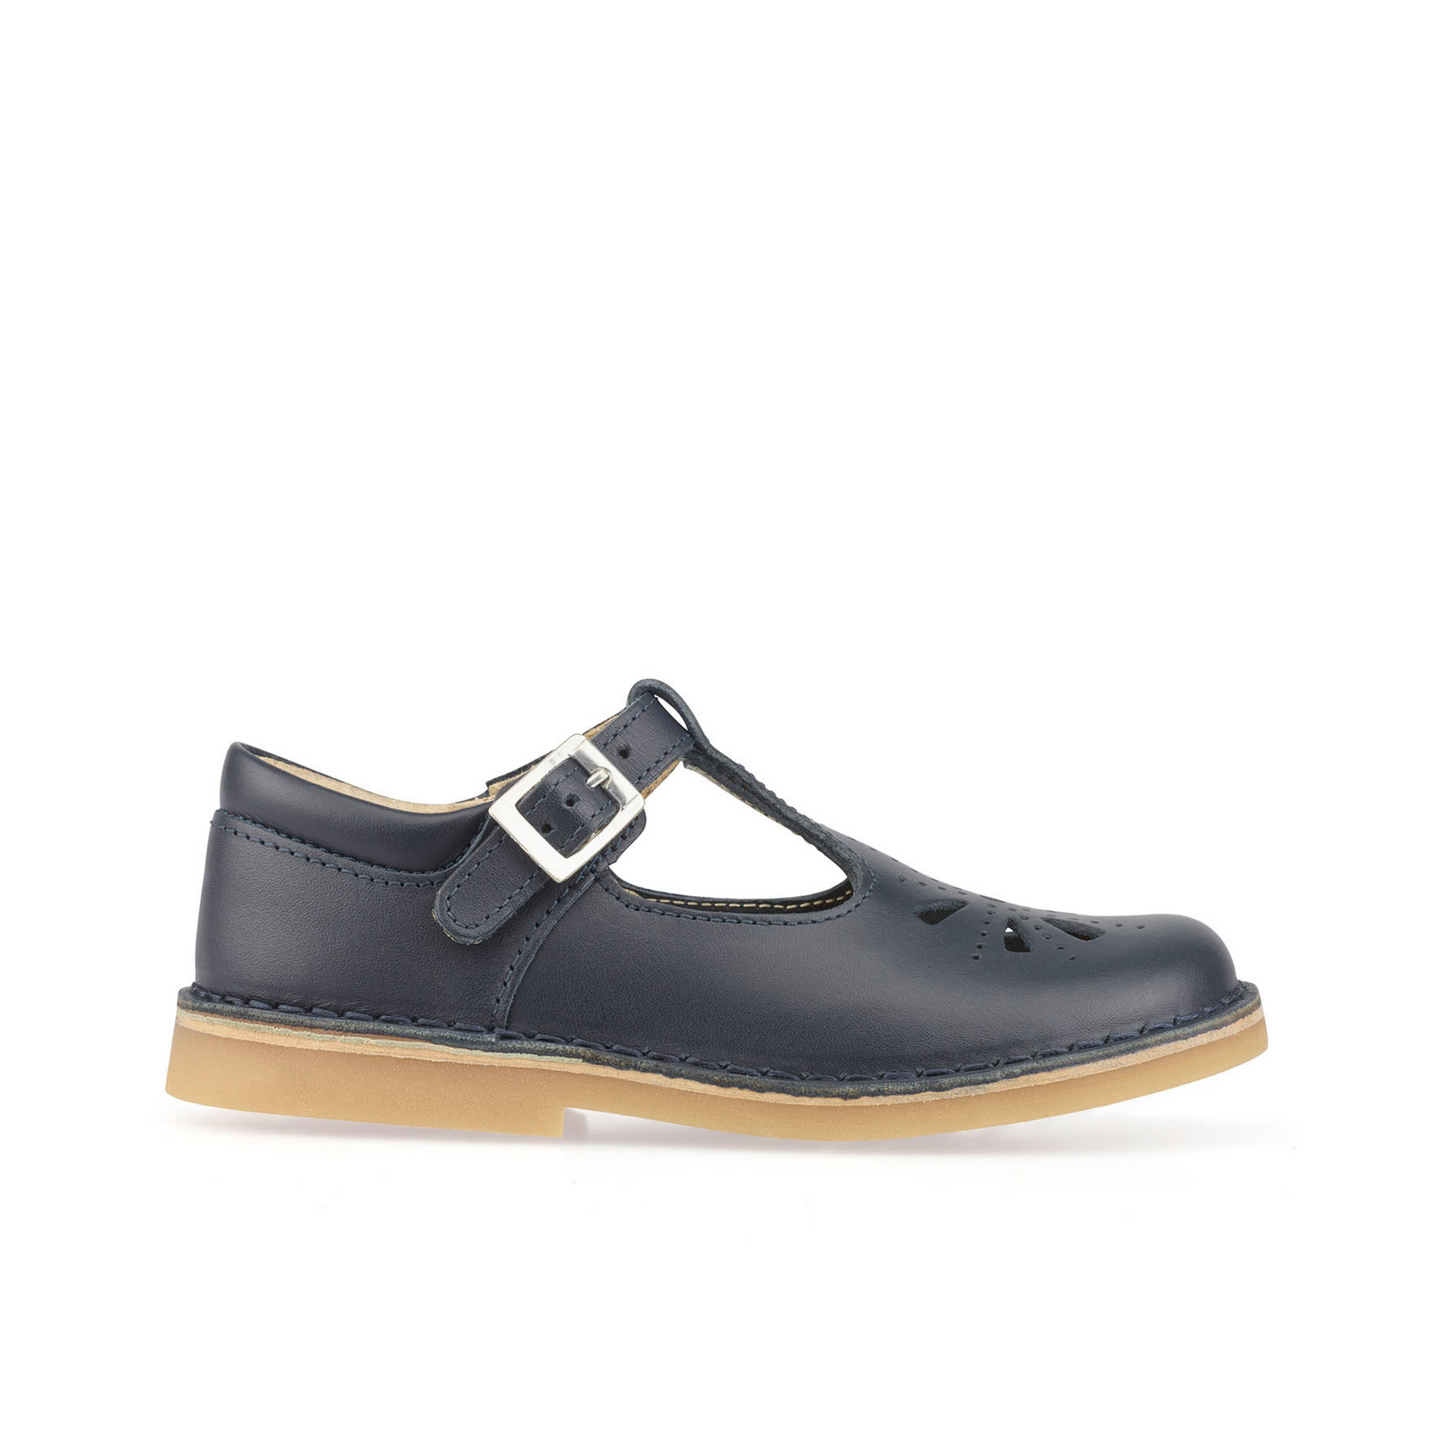 Lottie Classic Navy Leather Buckled T-Bar Stitchdown Shoe